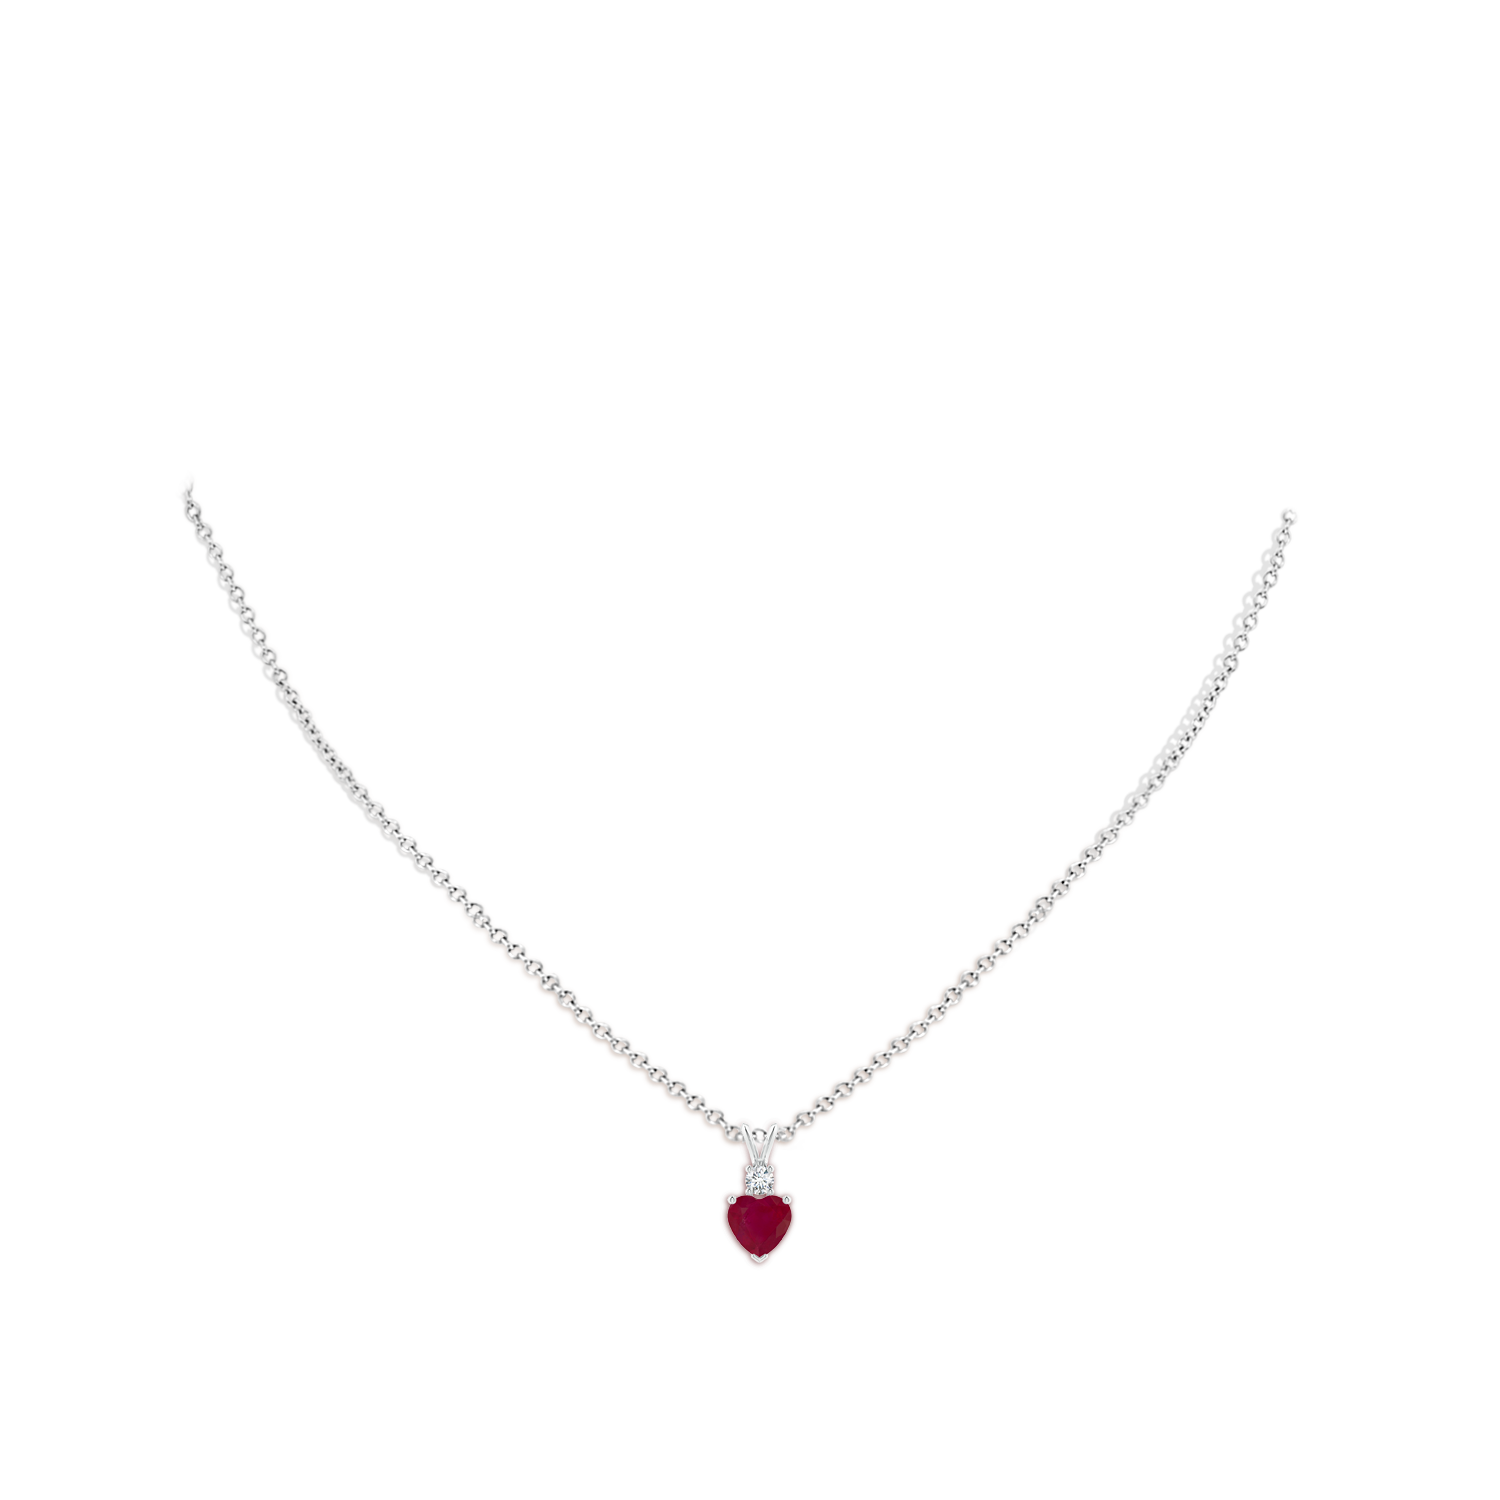 A - Ruby / 0.88 CT / 14 KT White Gold